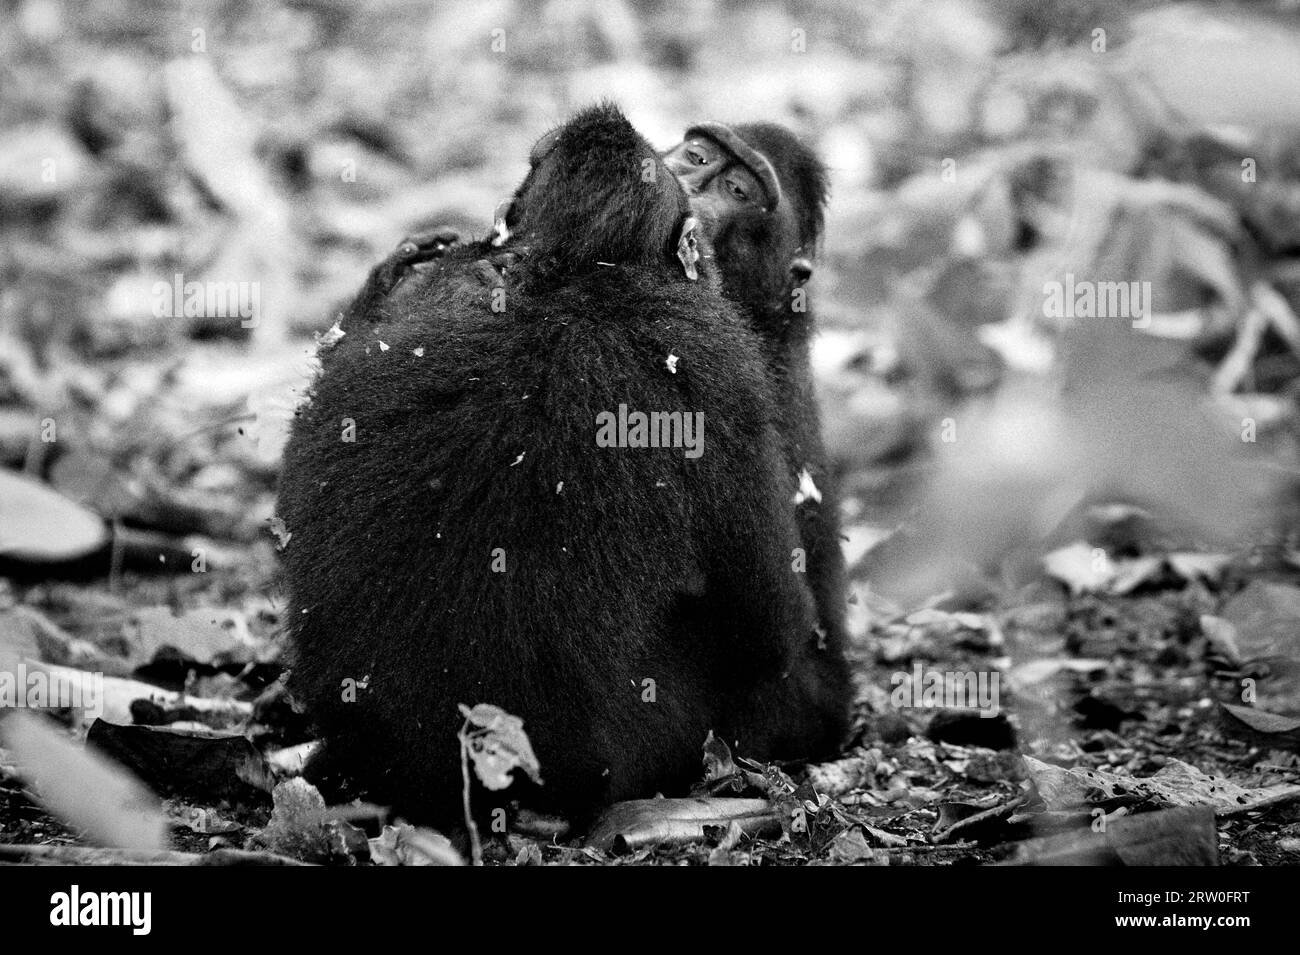 A black-crested macaque (Macaca nigra) kisses another individual as they are doing a reconciliation after an aggressive social activity on the ground in Tangkoko forest, North Sulawesi, Indonesia. Primatologists have found that fighting or chasing each other are part of crested macaque's social activities. Aggressive manual contacts occured frequently and are very normal, and are often followed by retaliation and reconciliation--a fact that has helped building the reputation of crested macaque as a 'highly socially tolerant species.' Macaca nigra is considered a key species in their habitat, . Stock Photo